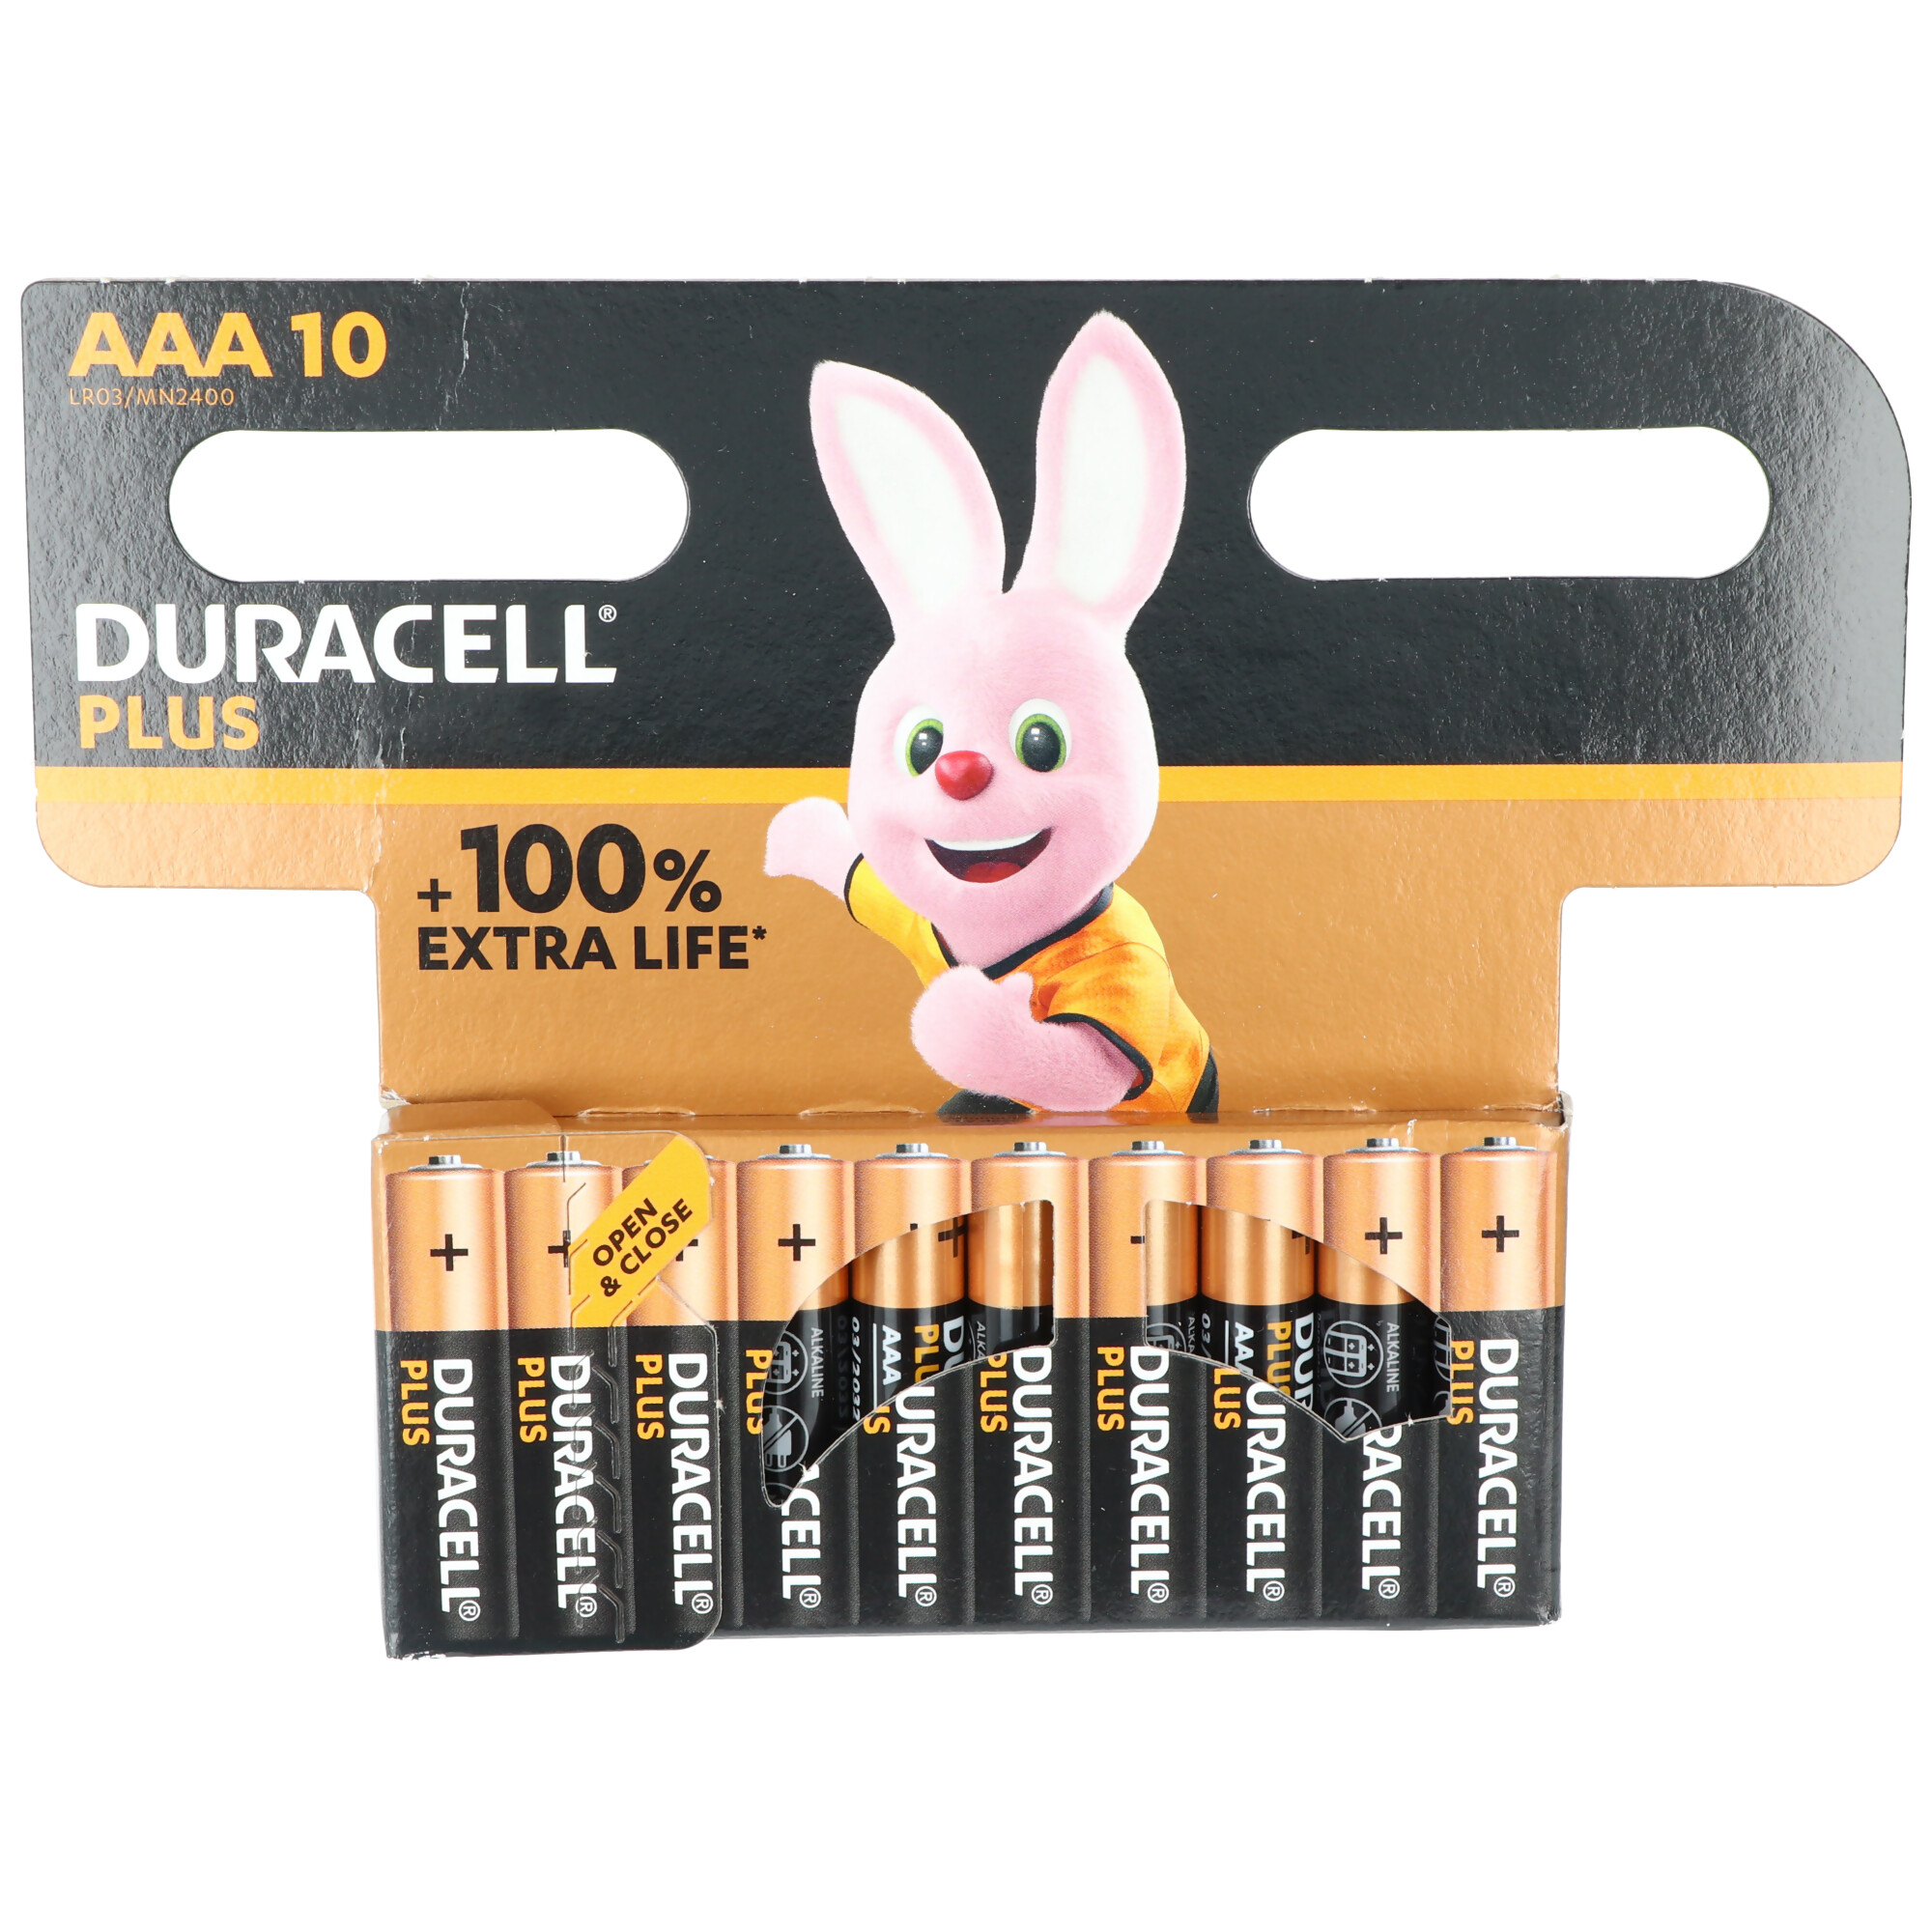 Duracell Batterie Alkaline, Micro, AAA, LR03, 1.5V Plus, Extra Life, Retail Blister (10-Pack)